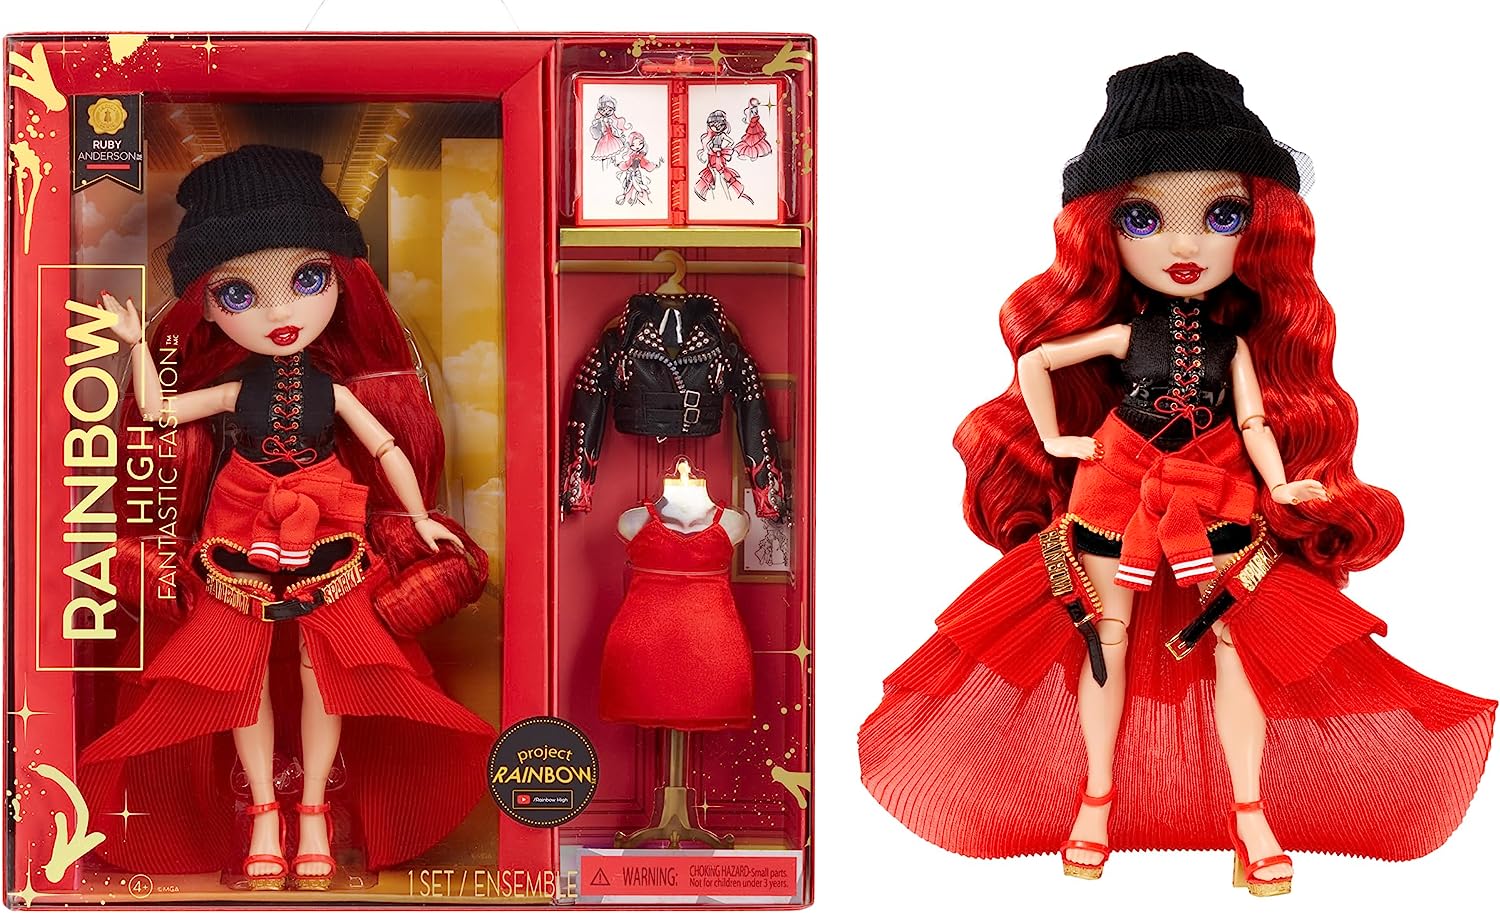 Rainbow High Fantastic Fashion Ruby Anderson - Red 11” Fashion Doll and Playset with 2 Complete Doll Outfits, and Fashion Play Accessories